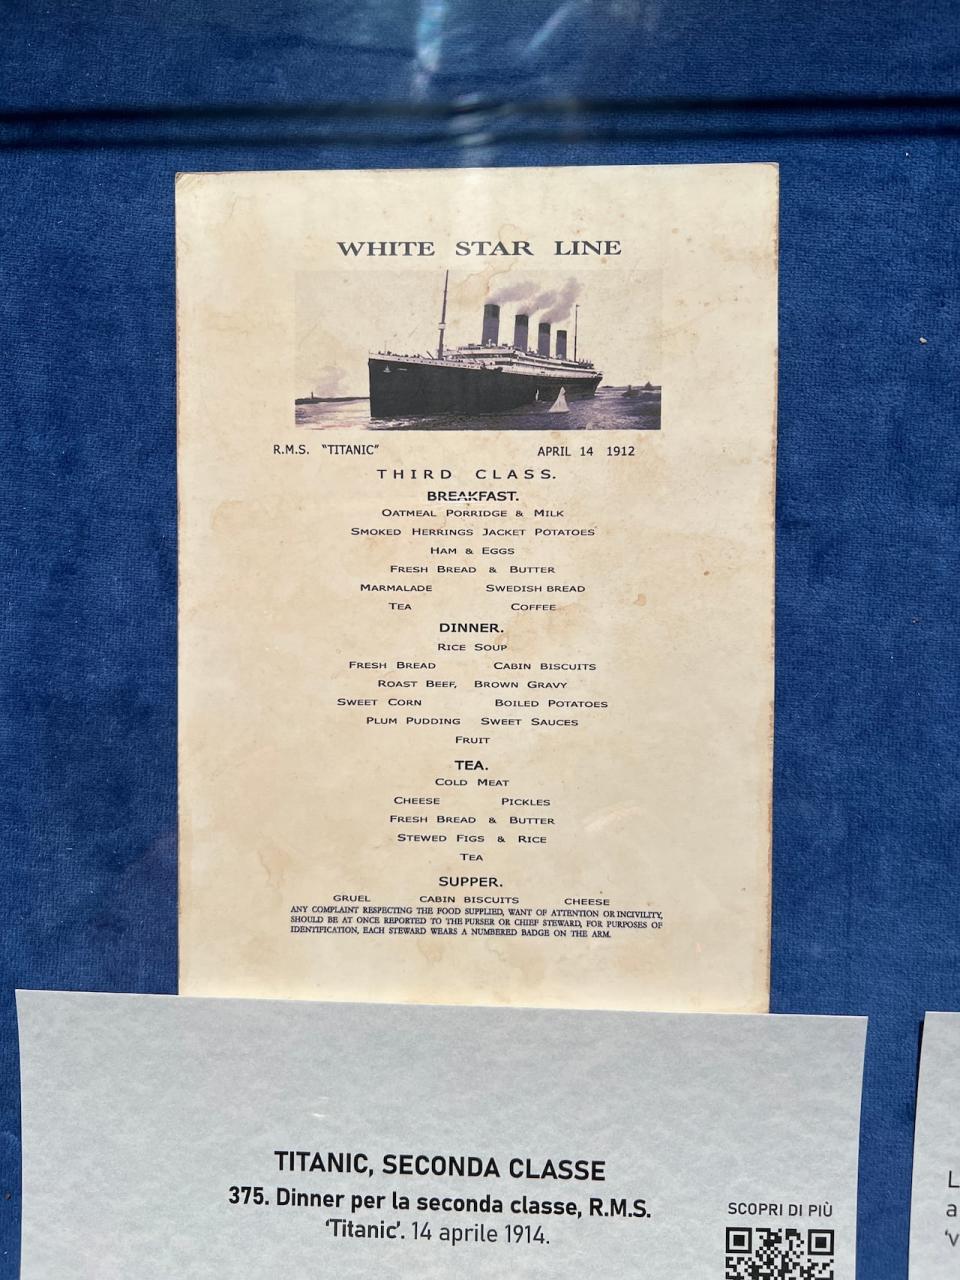 The third-class menu on the Titanic. Guests were served roast beef and gravy with boiled potatoes for dinner, with a supper of gruel, cabin biscuits and cheese. The menu comes with a note directing guests on where to complain about “food supplied, want of attention or incivility.”  